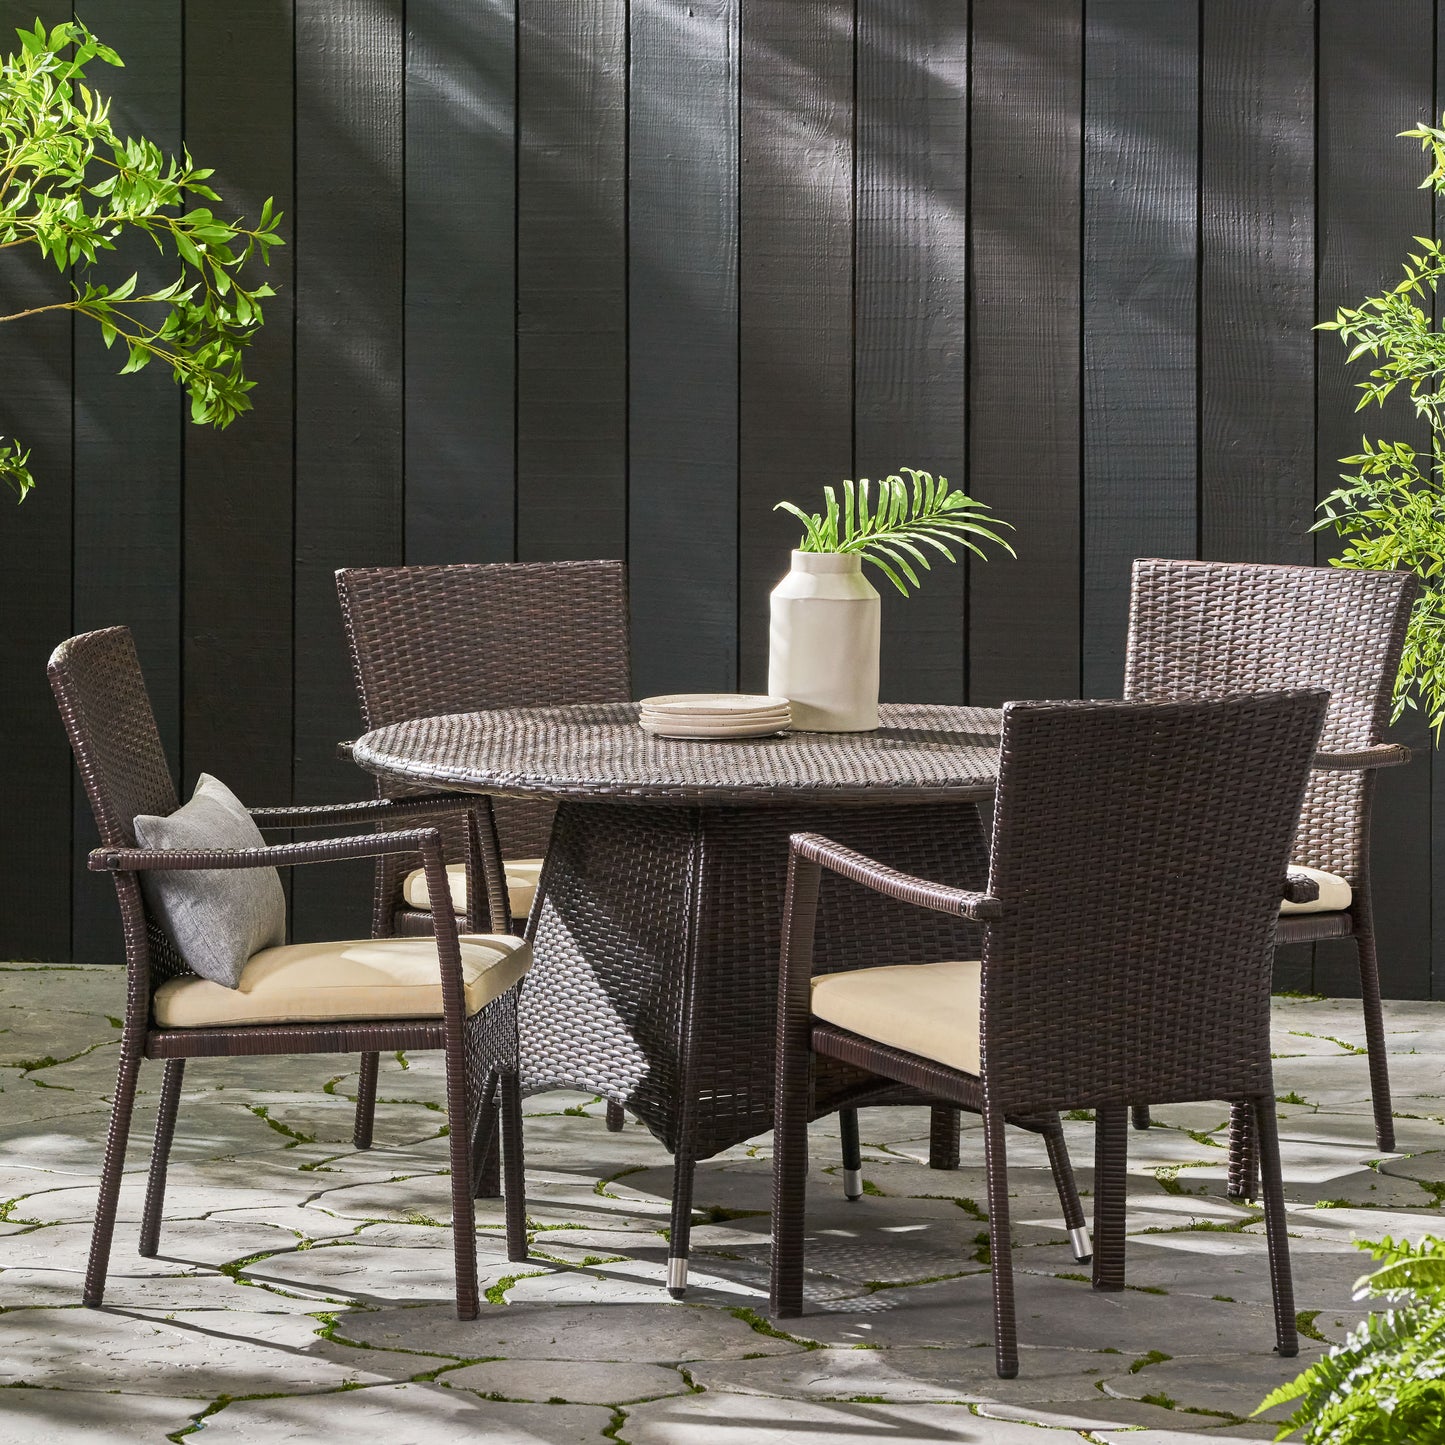 Cypress Outdoor 5-piece Wicker Dining Set with Cushions